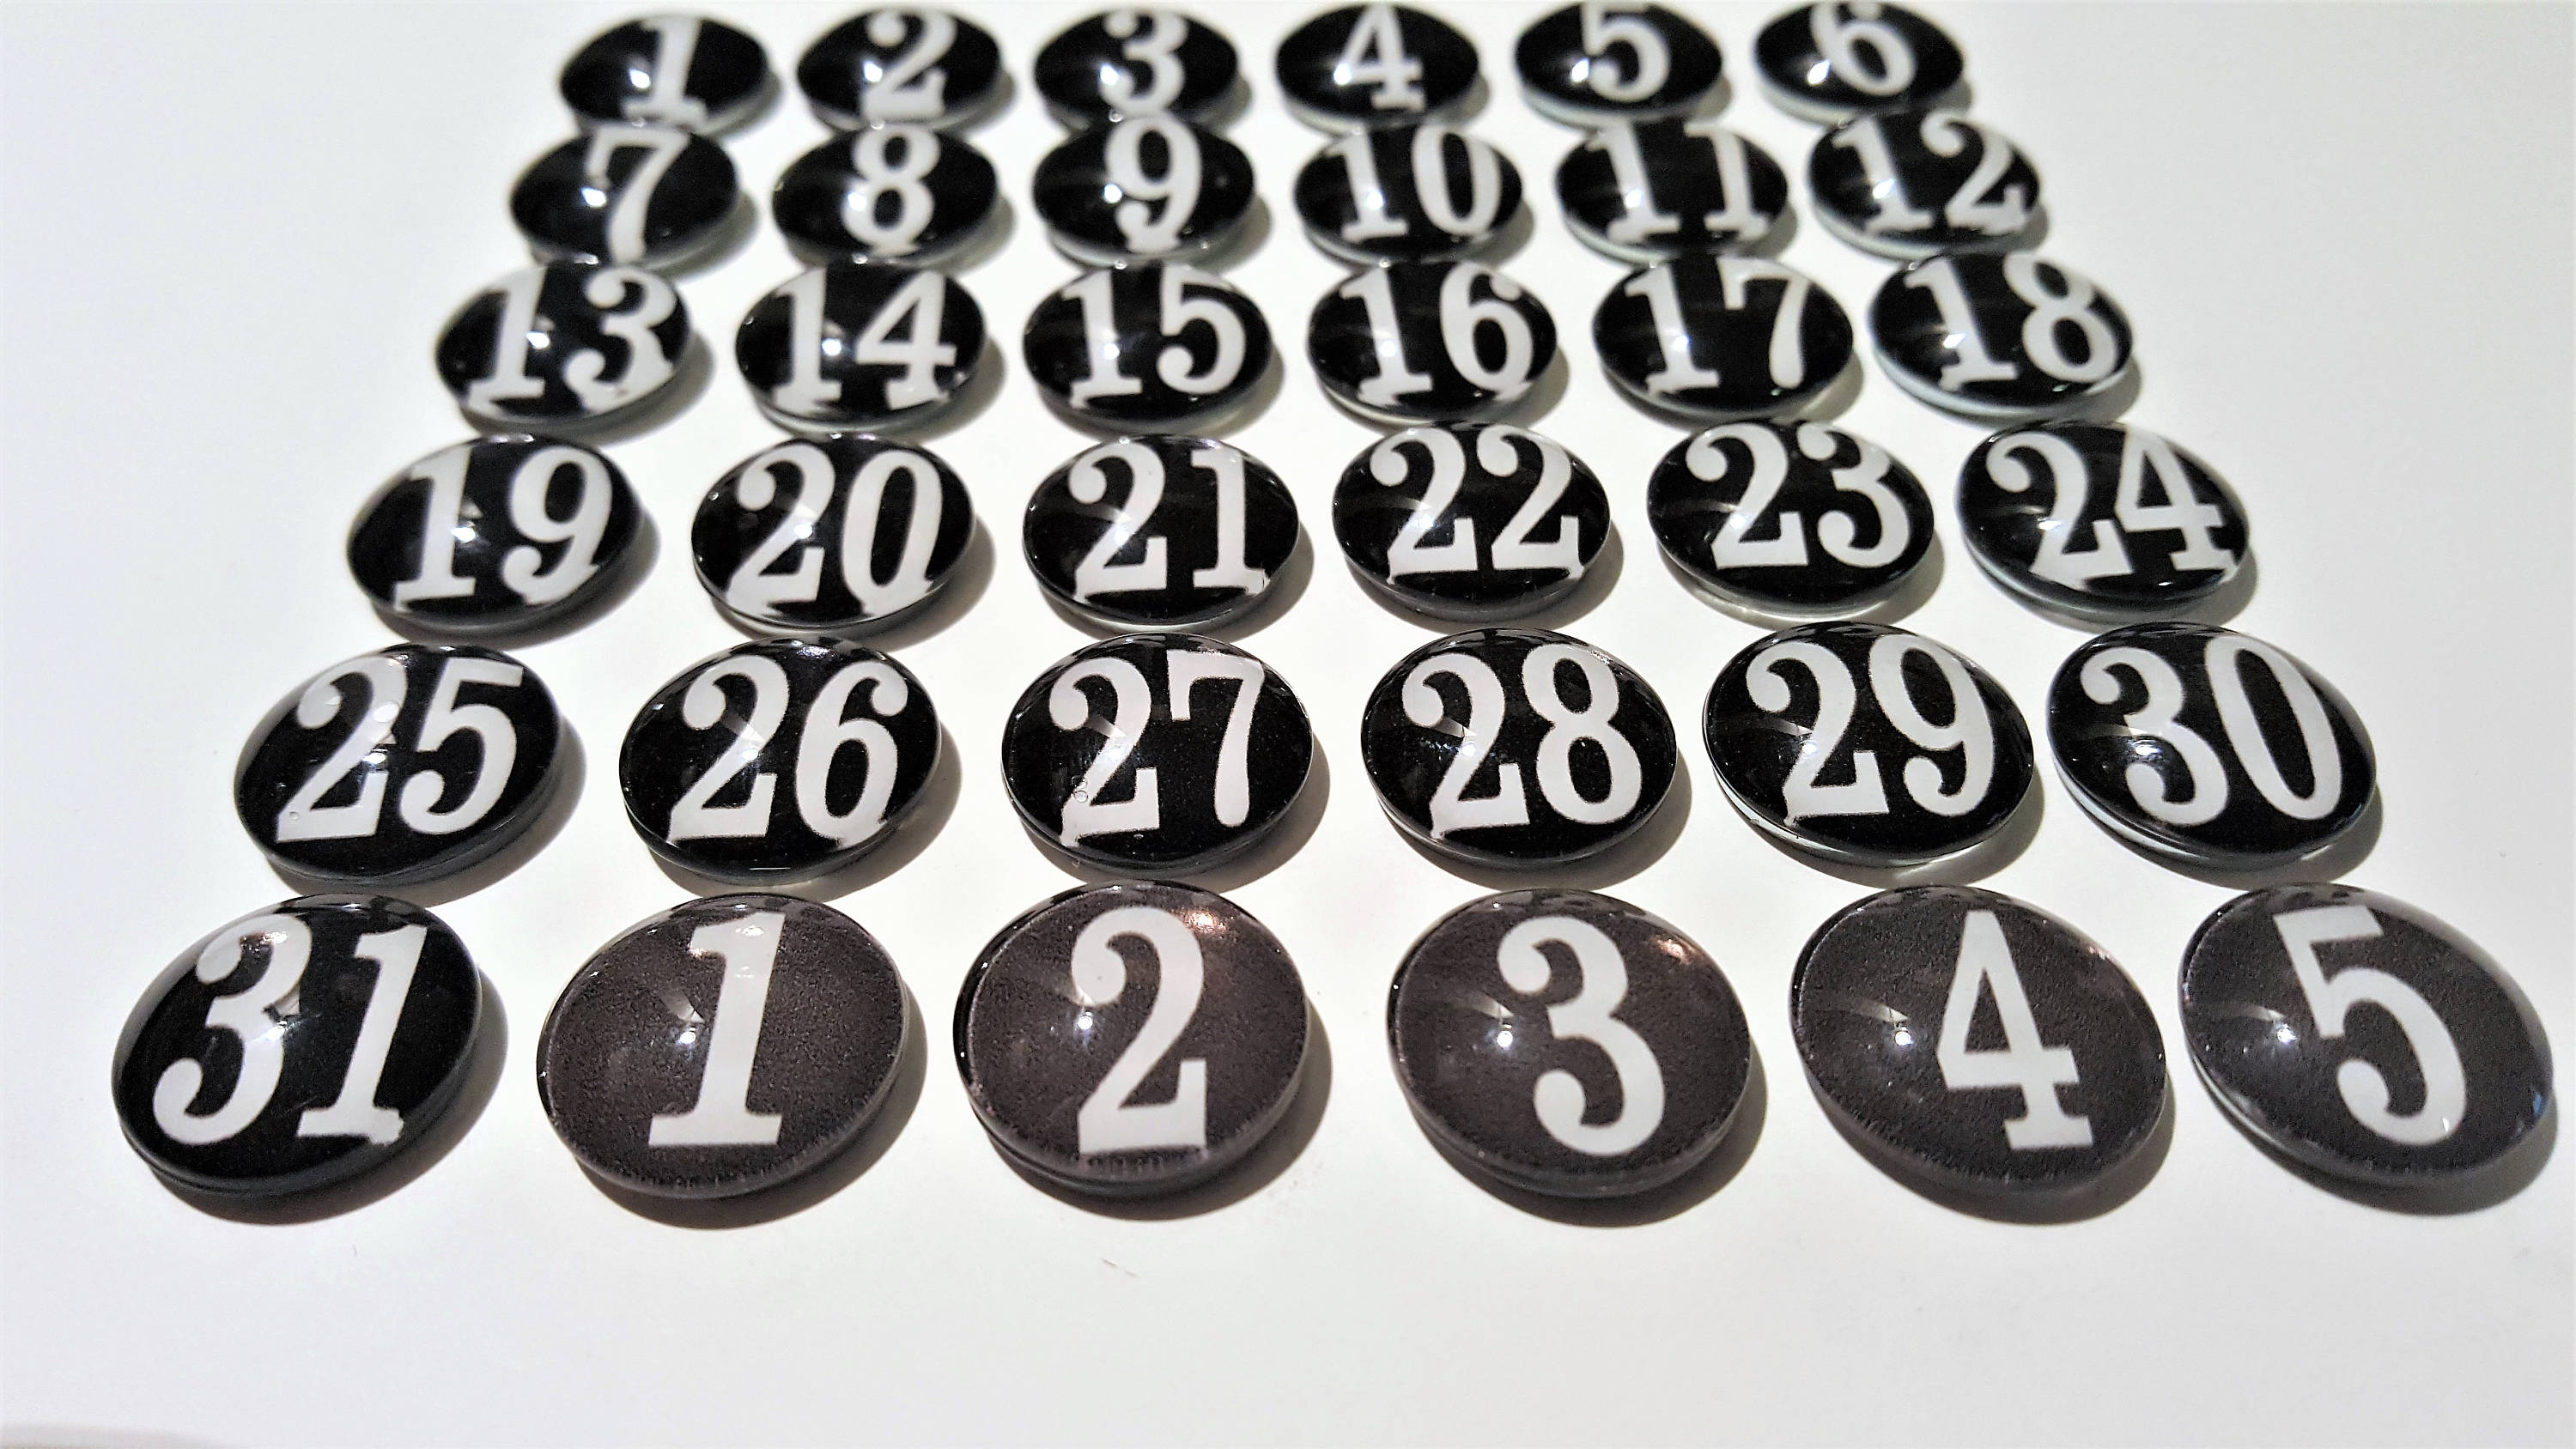 Number 23 White Black Stickers, Magnet